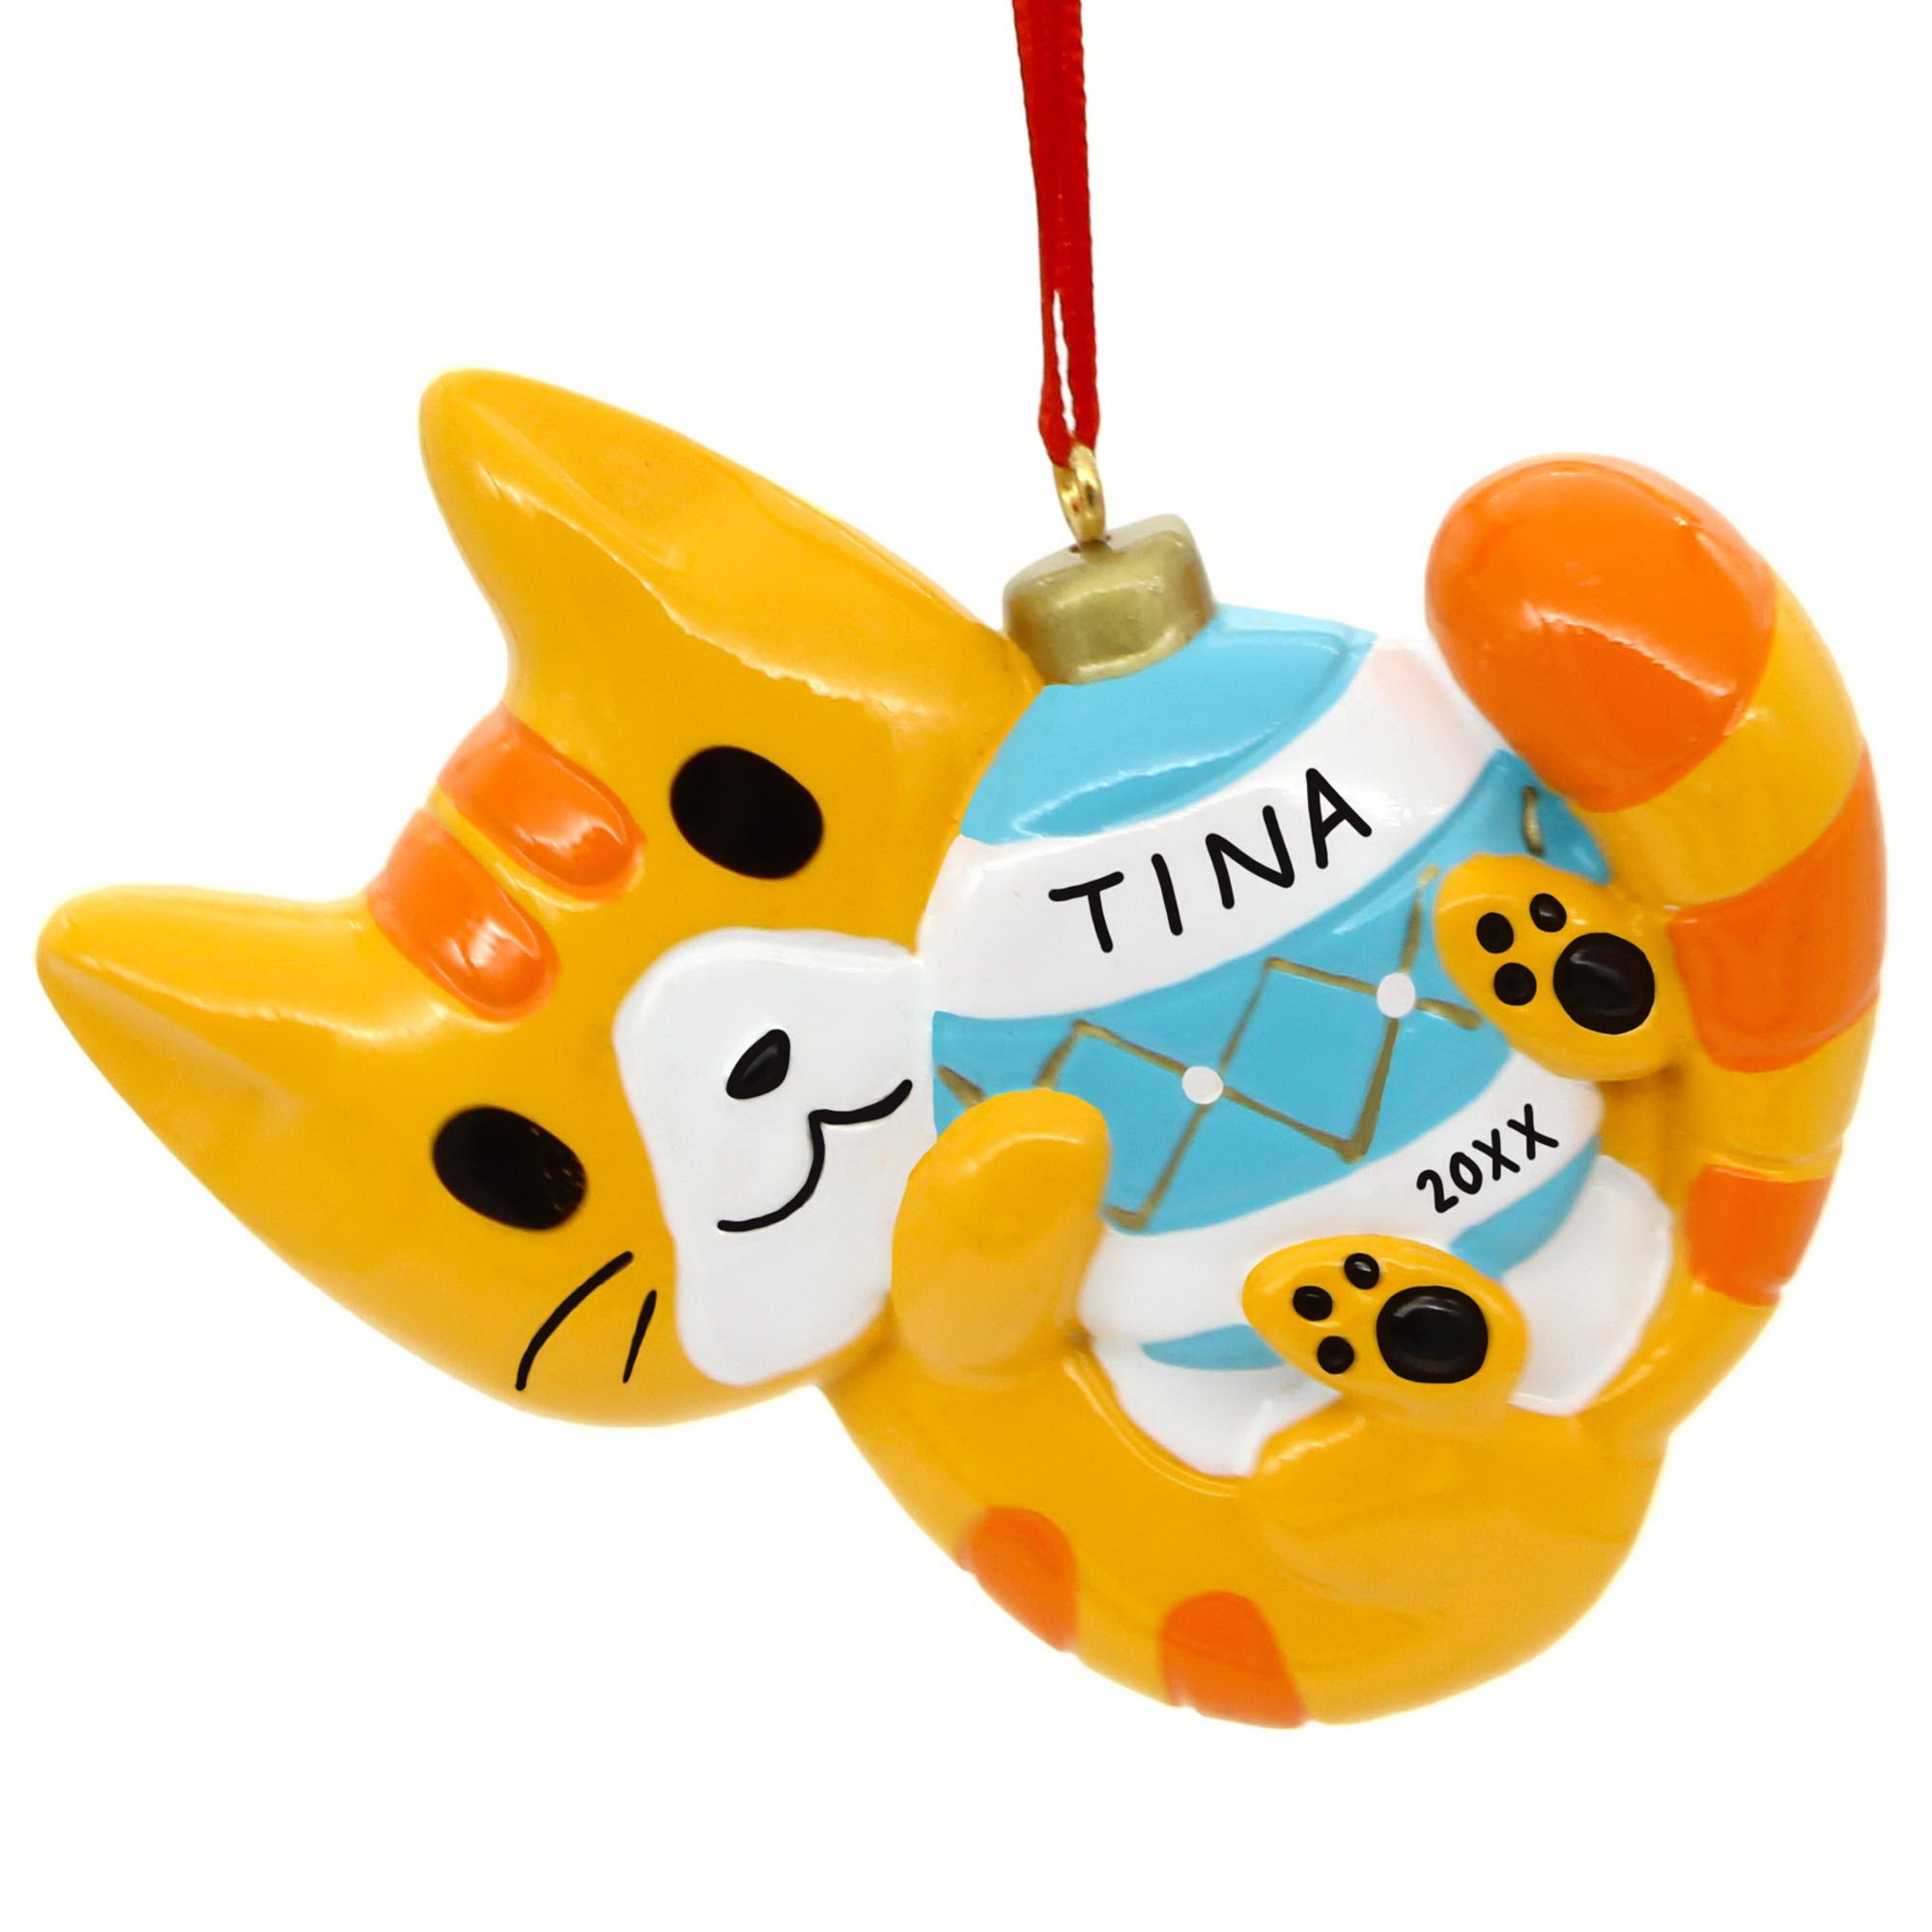 Personalized Tabby Cat Christmas Ornament - Orange